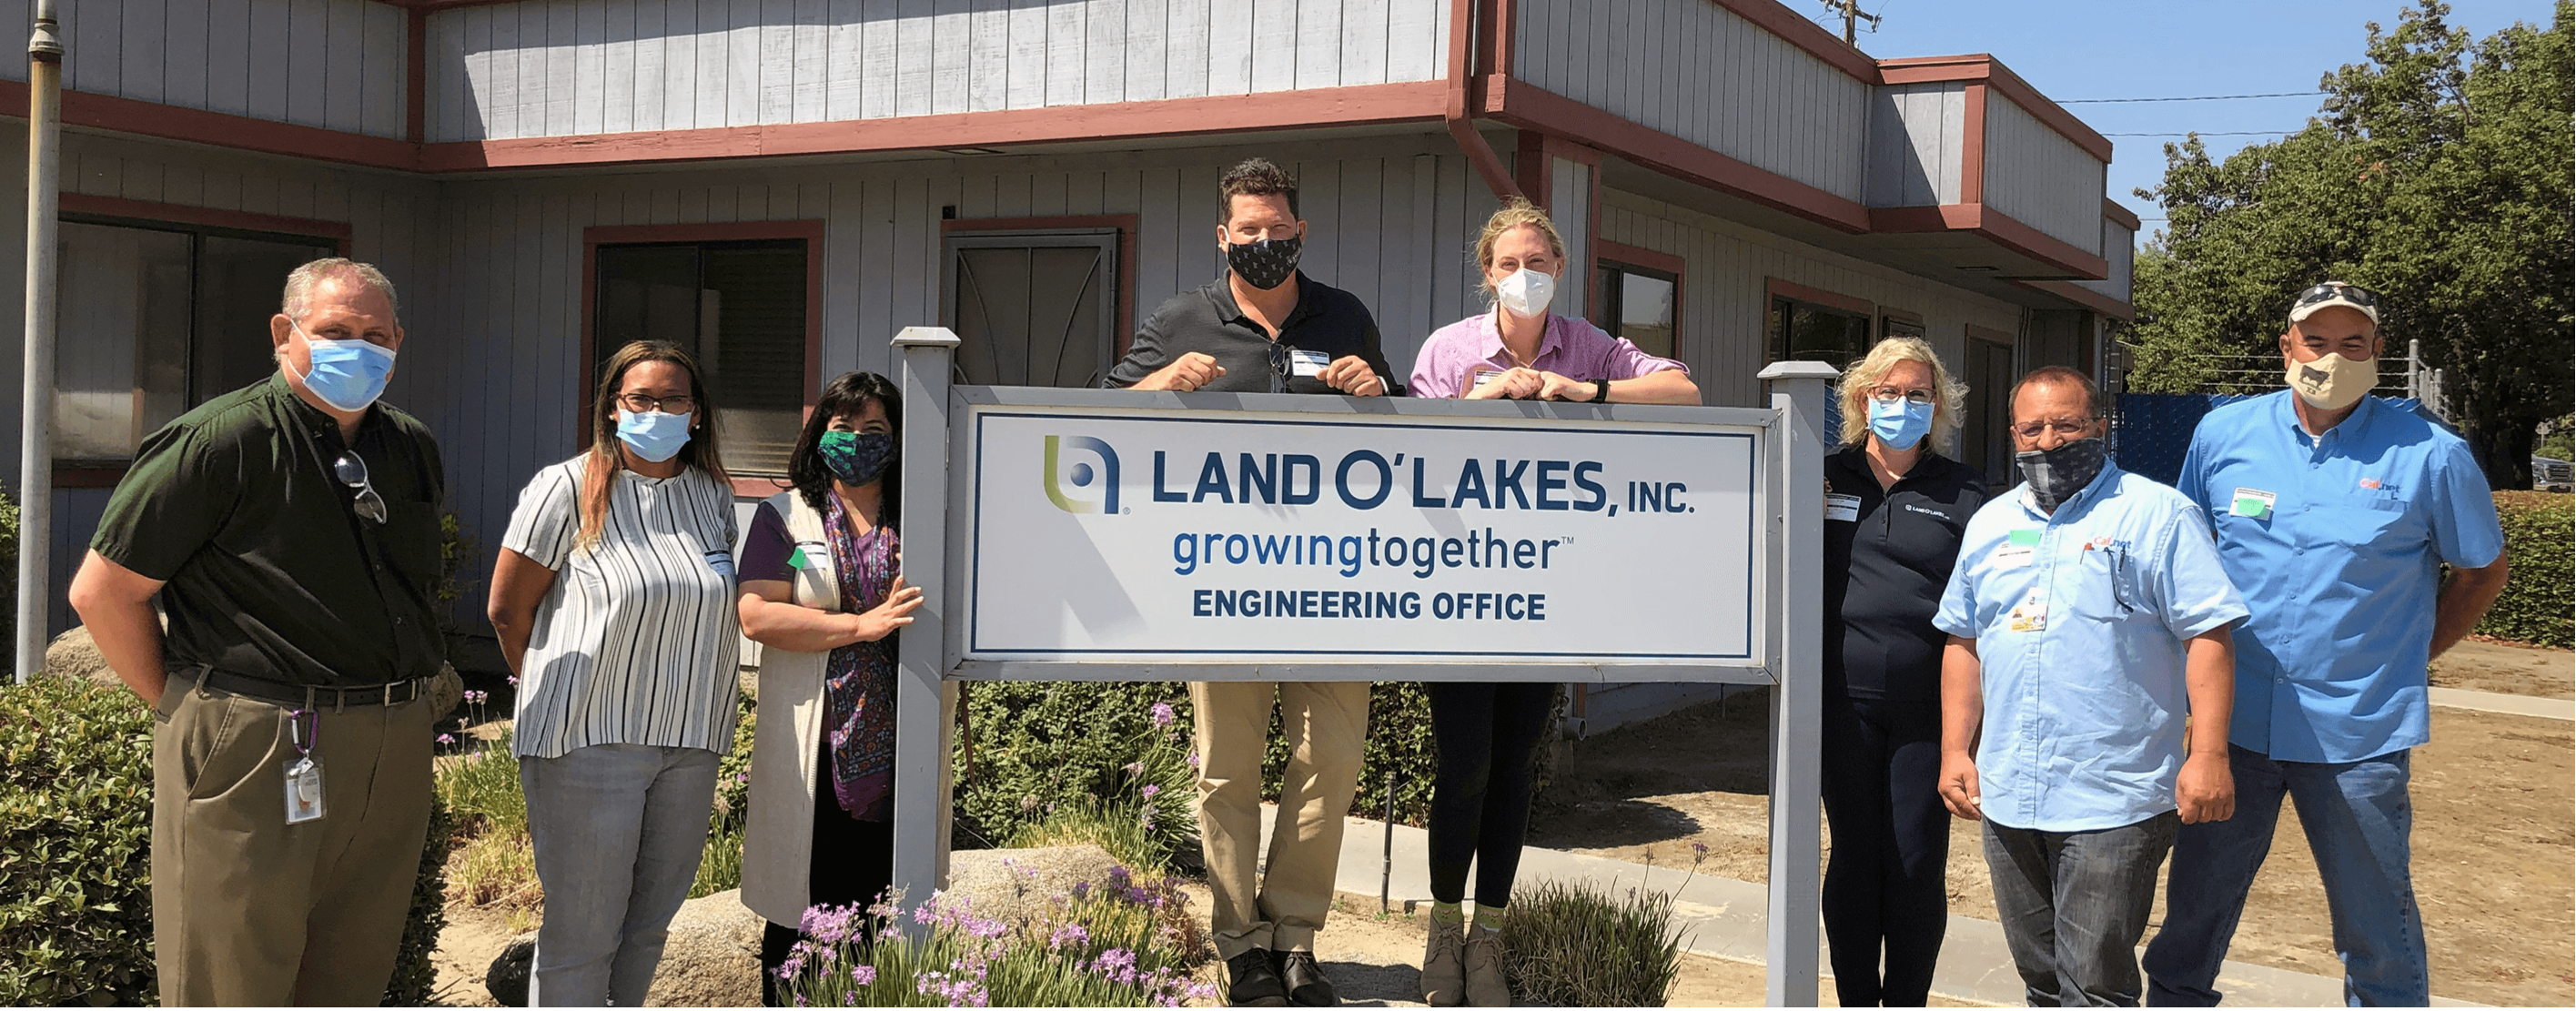 A group of Land O'Lakes employees standing next to a sign that says "Land O'Lakes, Inc. growing together engineering office ."